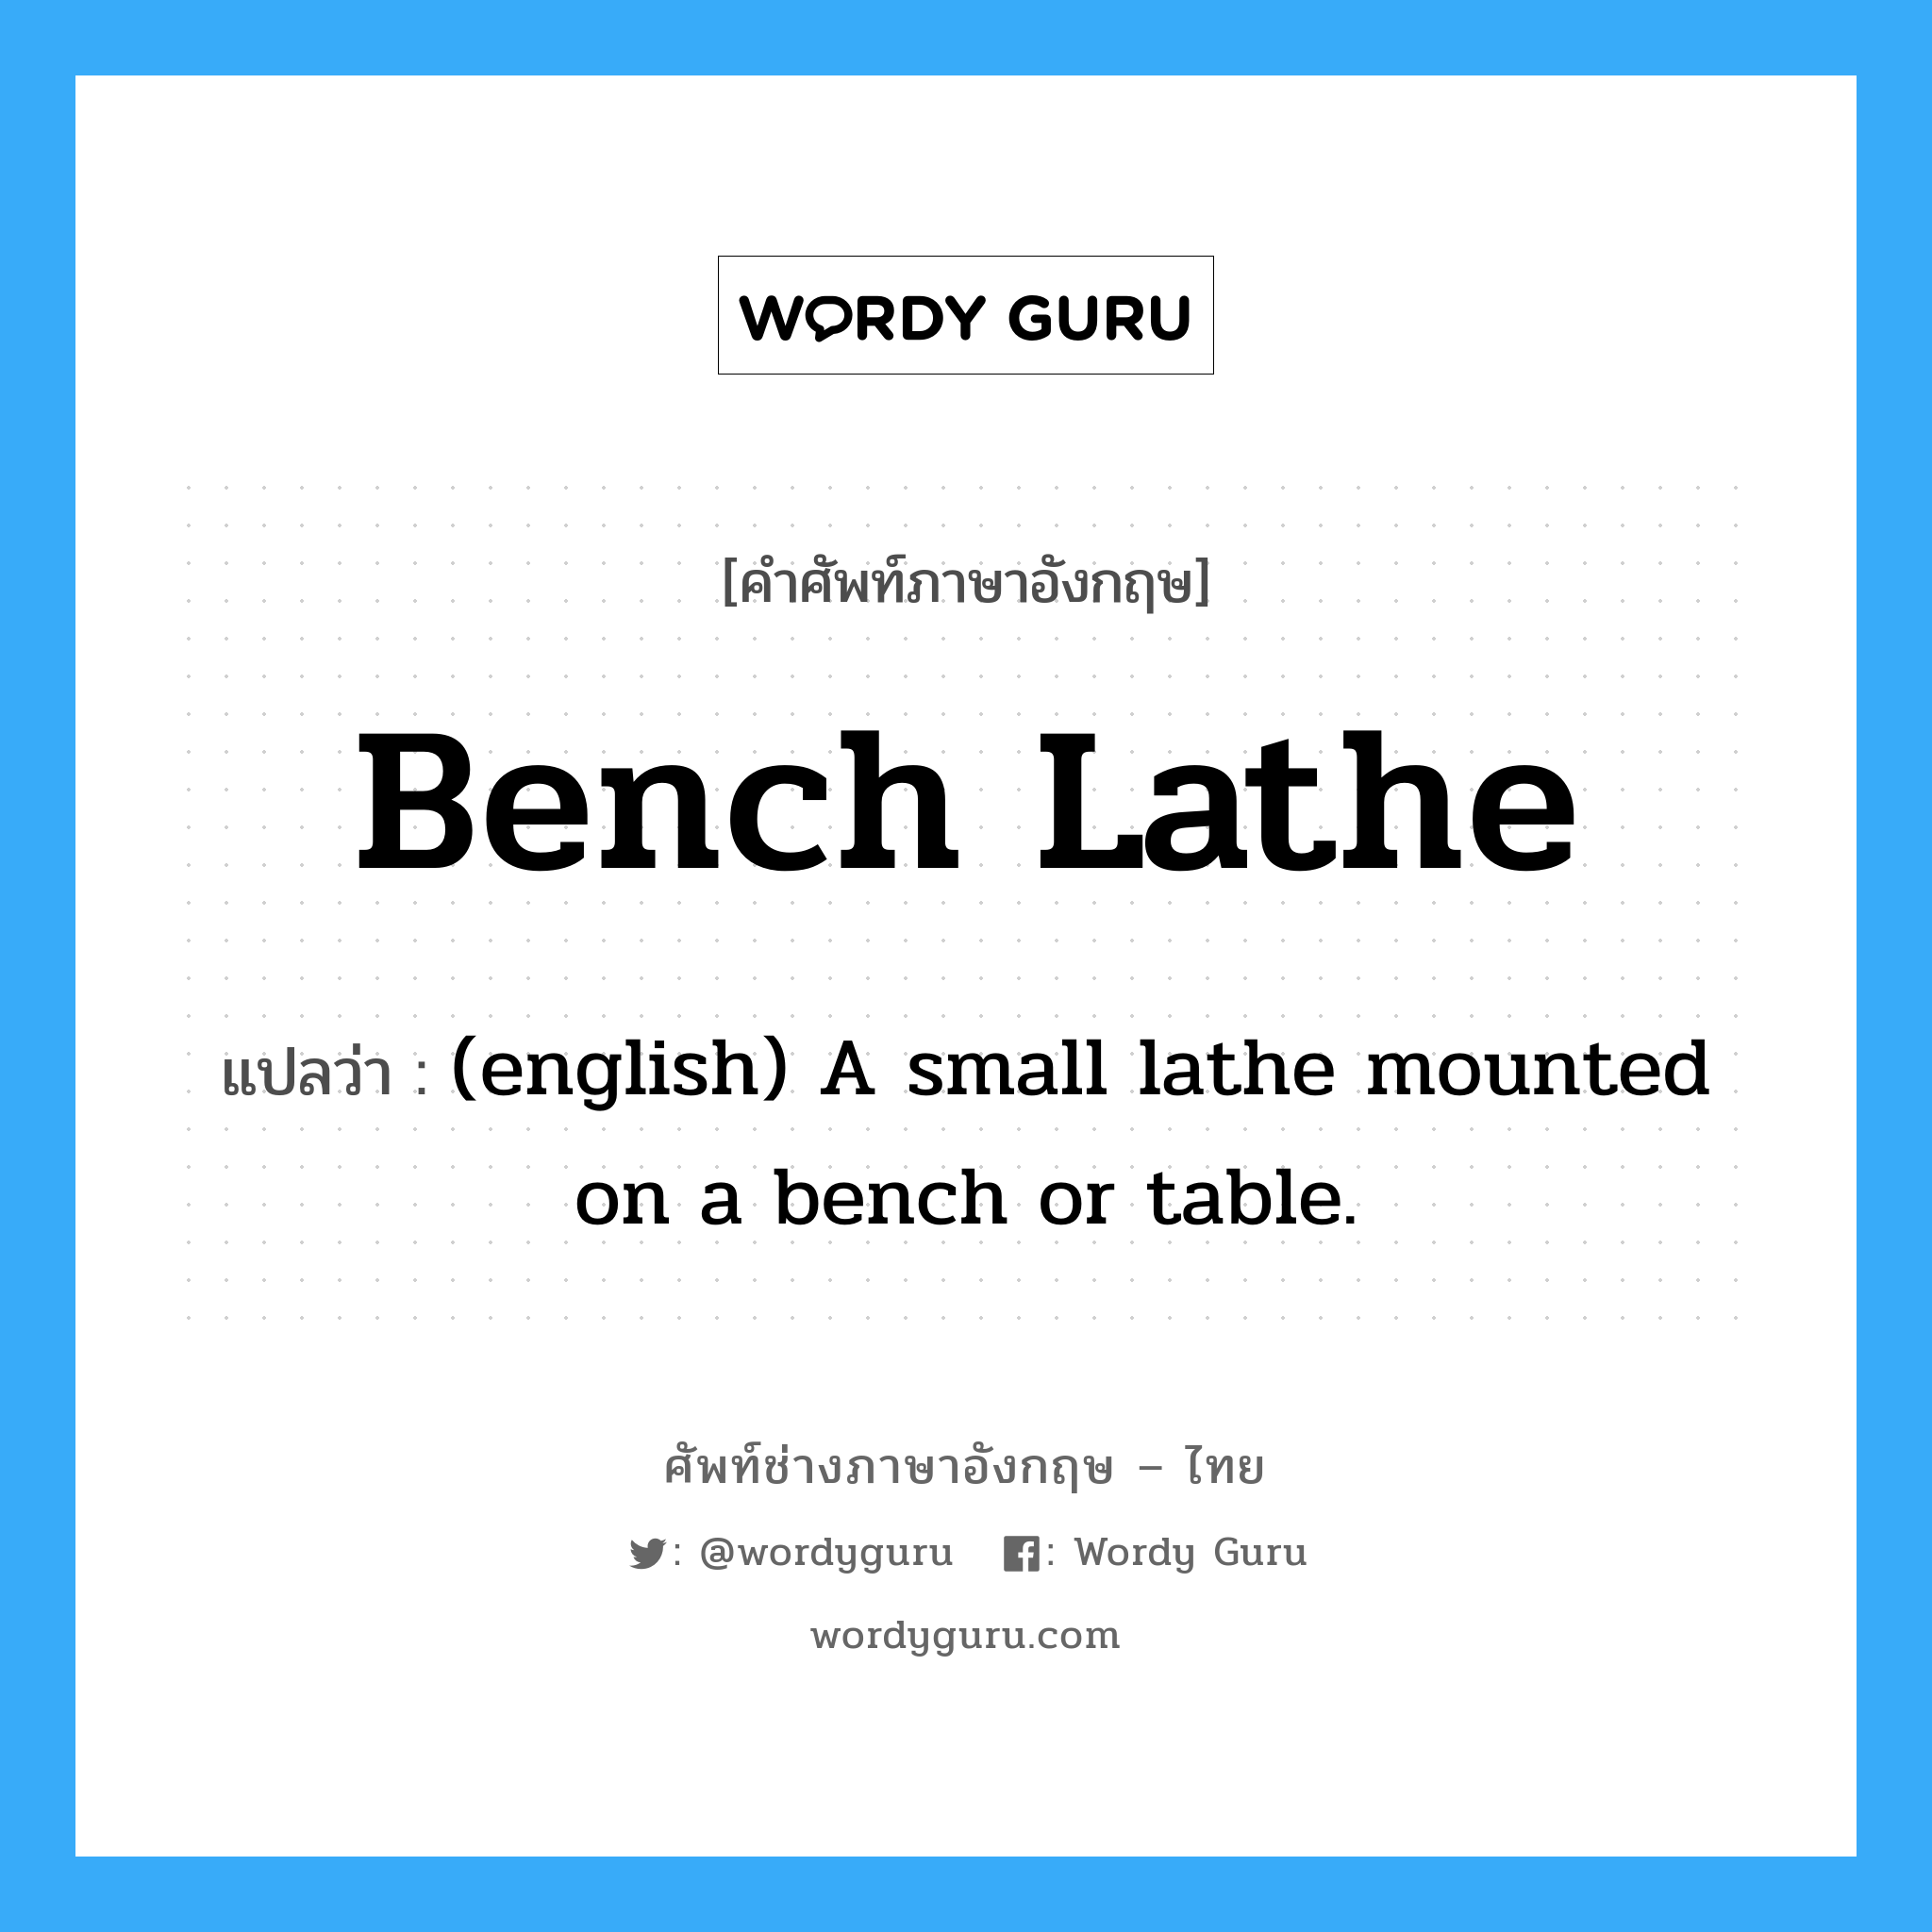 (english) A small lathe mounted on a bench or table. ภาษาอังกฤษ?, คำศัพท์ช่างภาษาอังกฤษ - ไทย (english) A small lathe mounted on a bench or table. คำศัพท์ภาษาอังกฤษ (english) A small lathe mounted on a bench or table. แปลว่า Bench Lathe